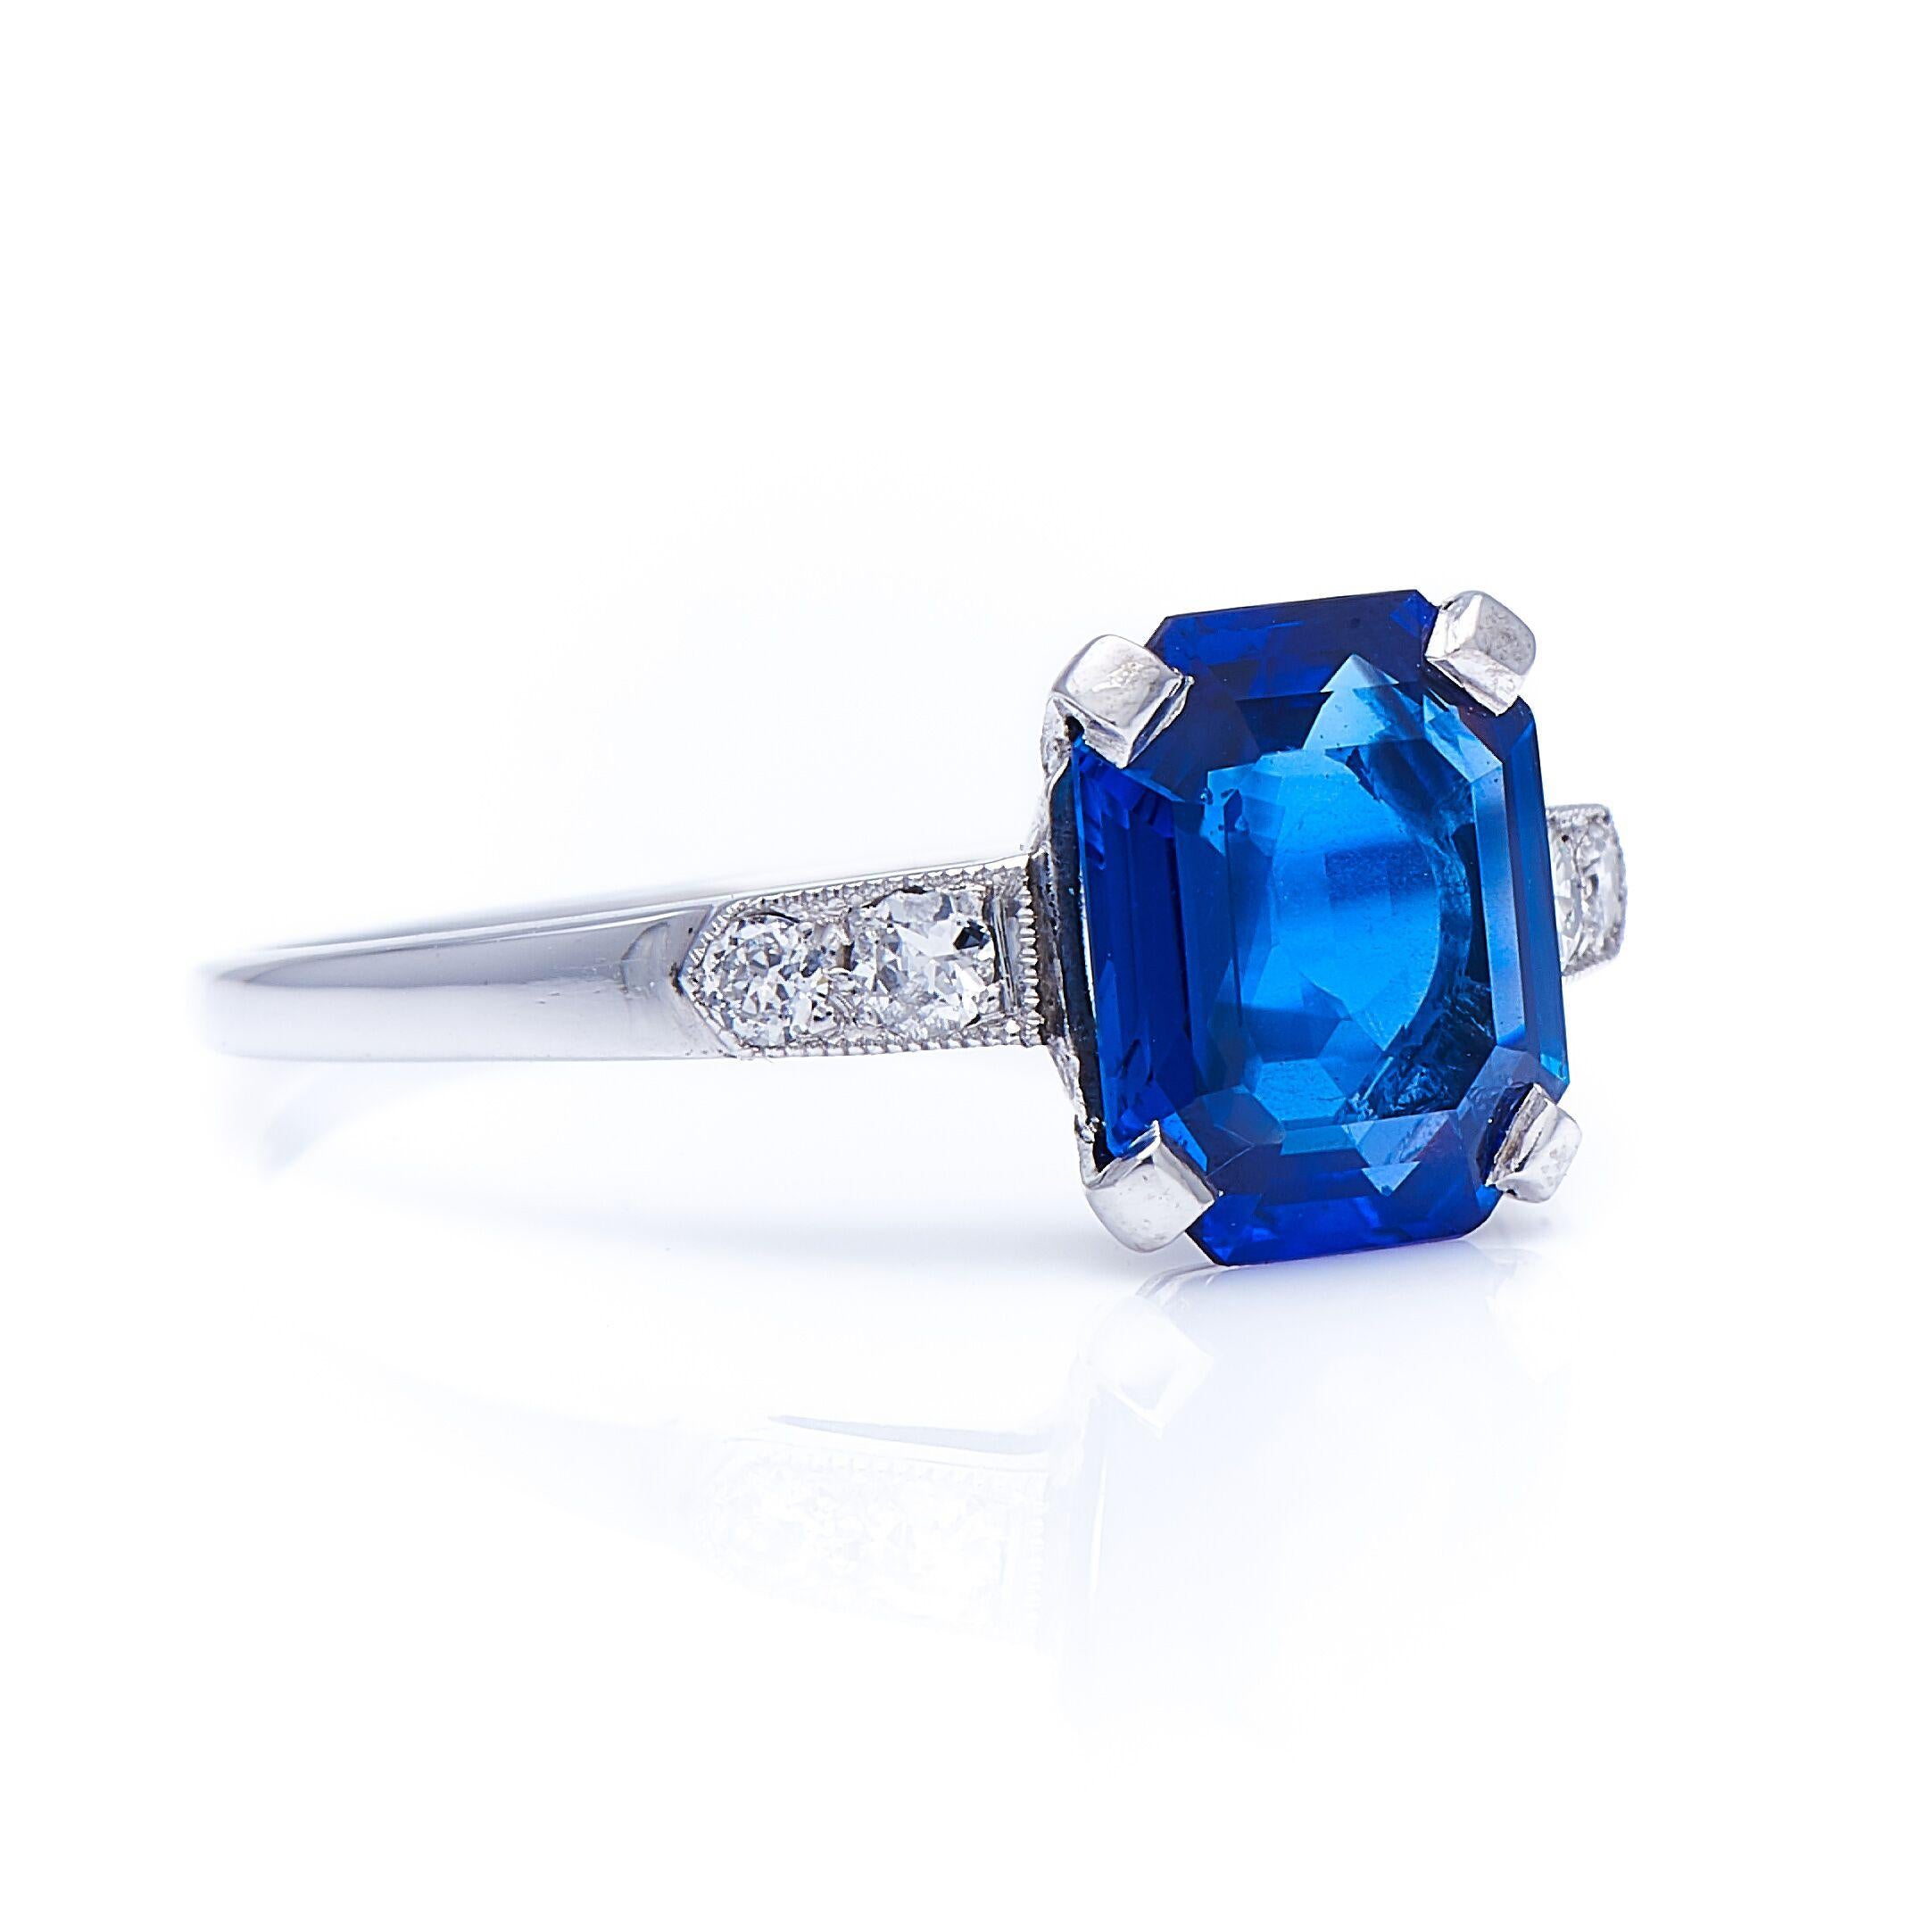 Sapphire and diamond ring, circa 1925. The striking shape of this untreated sapphire is known as an ‘emerald cut’. Originally developed specifically for emeralds due to their brittleness, the emerald cut, with its cut corners and low profile,